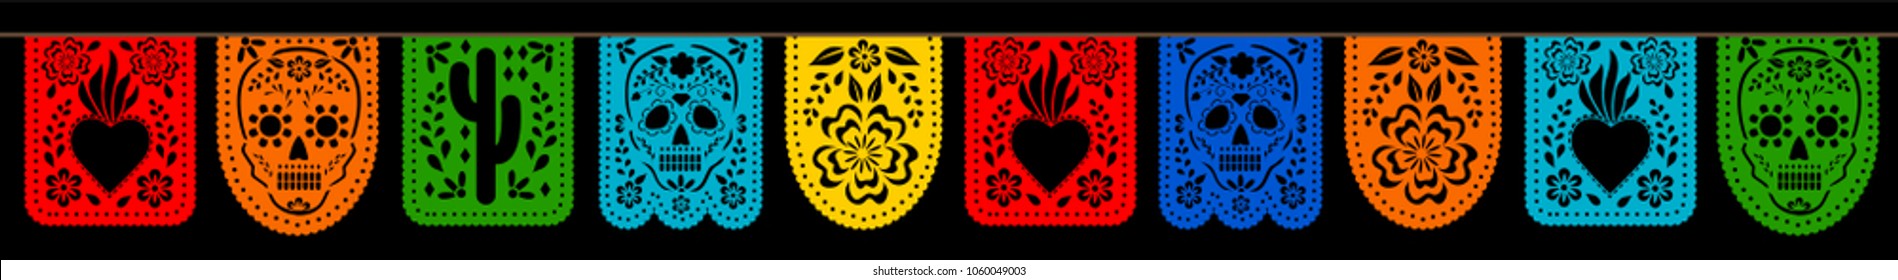 Mexican bunting for Day of the Dead (Dia de los Muertos). Horizontal web banner